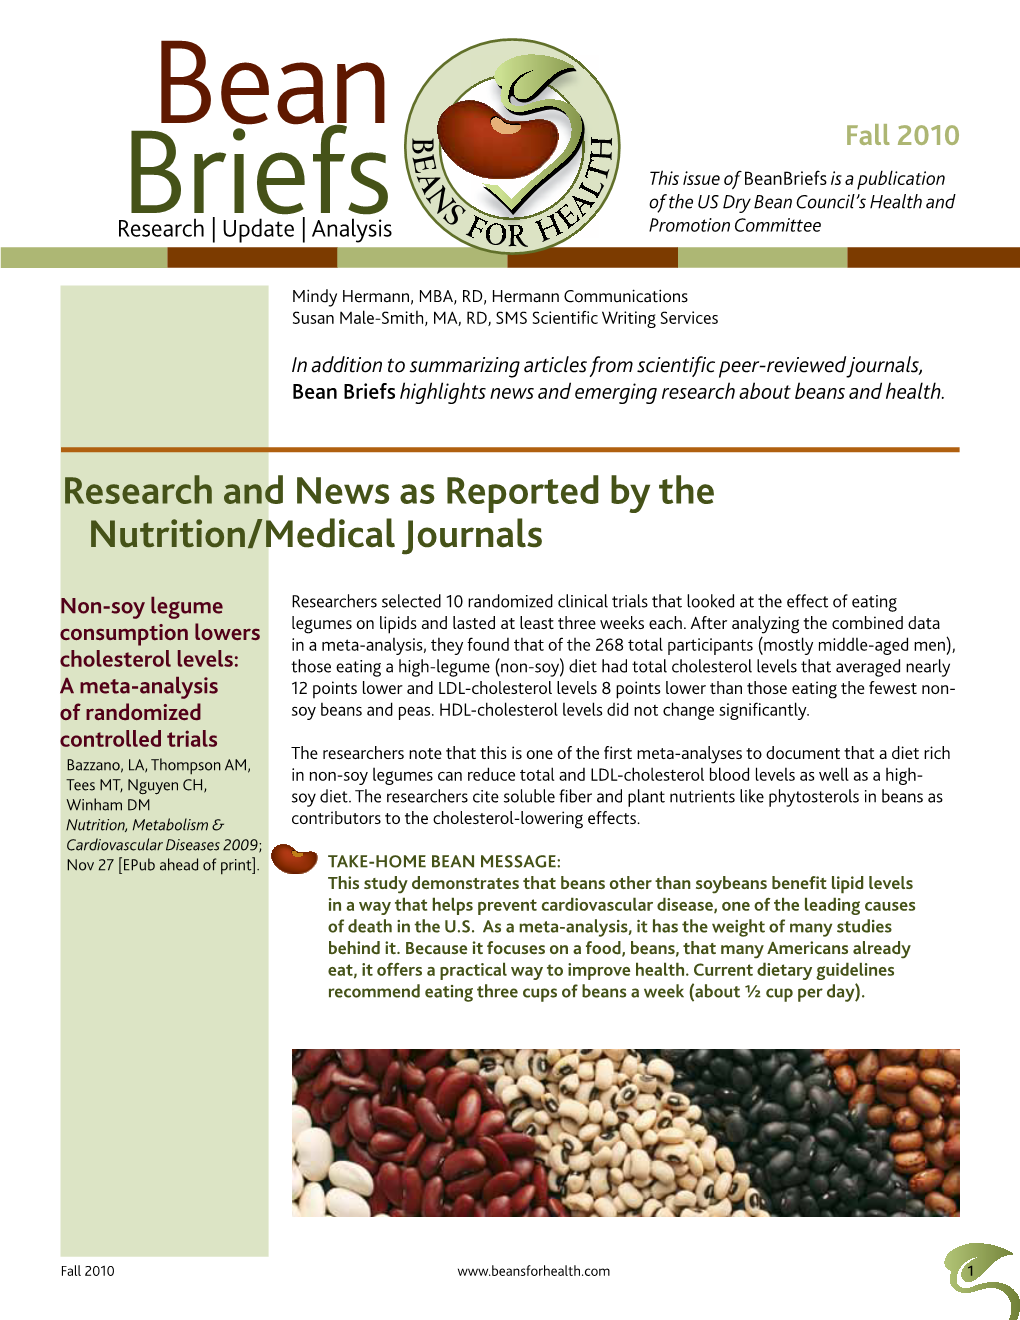 Research and News As Reported by the Nutrition/Medical Journals